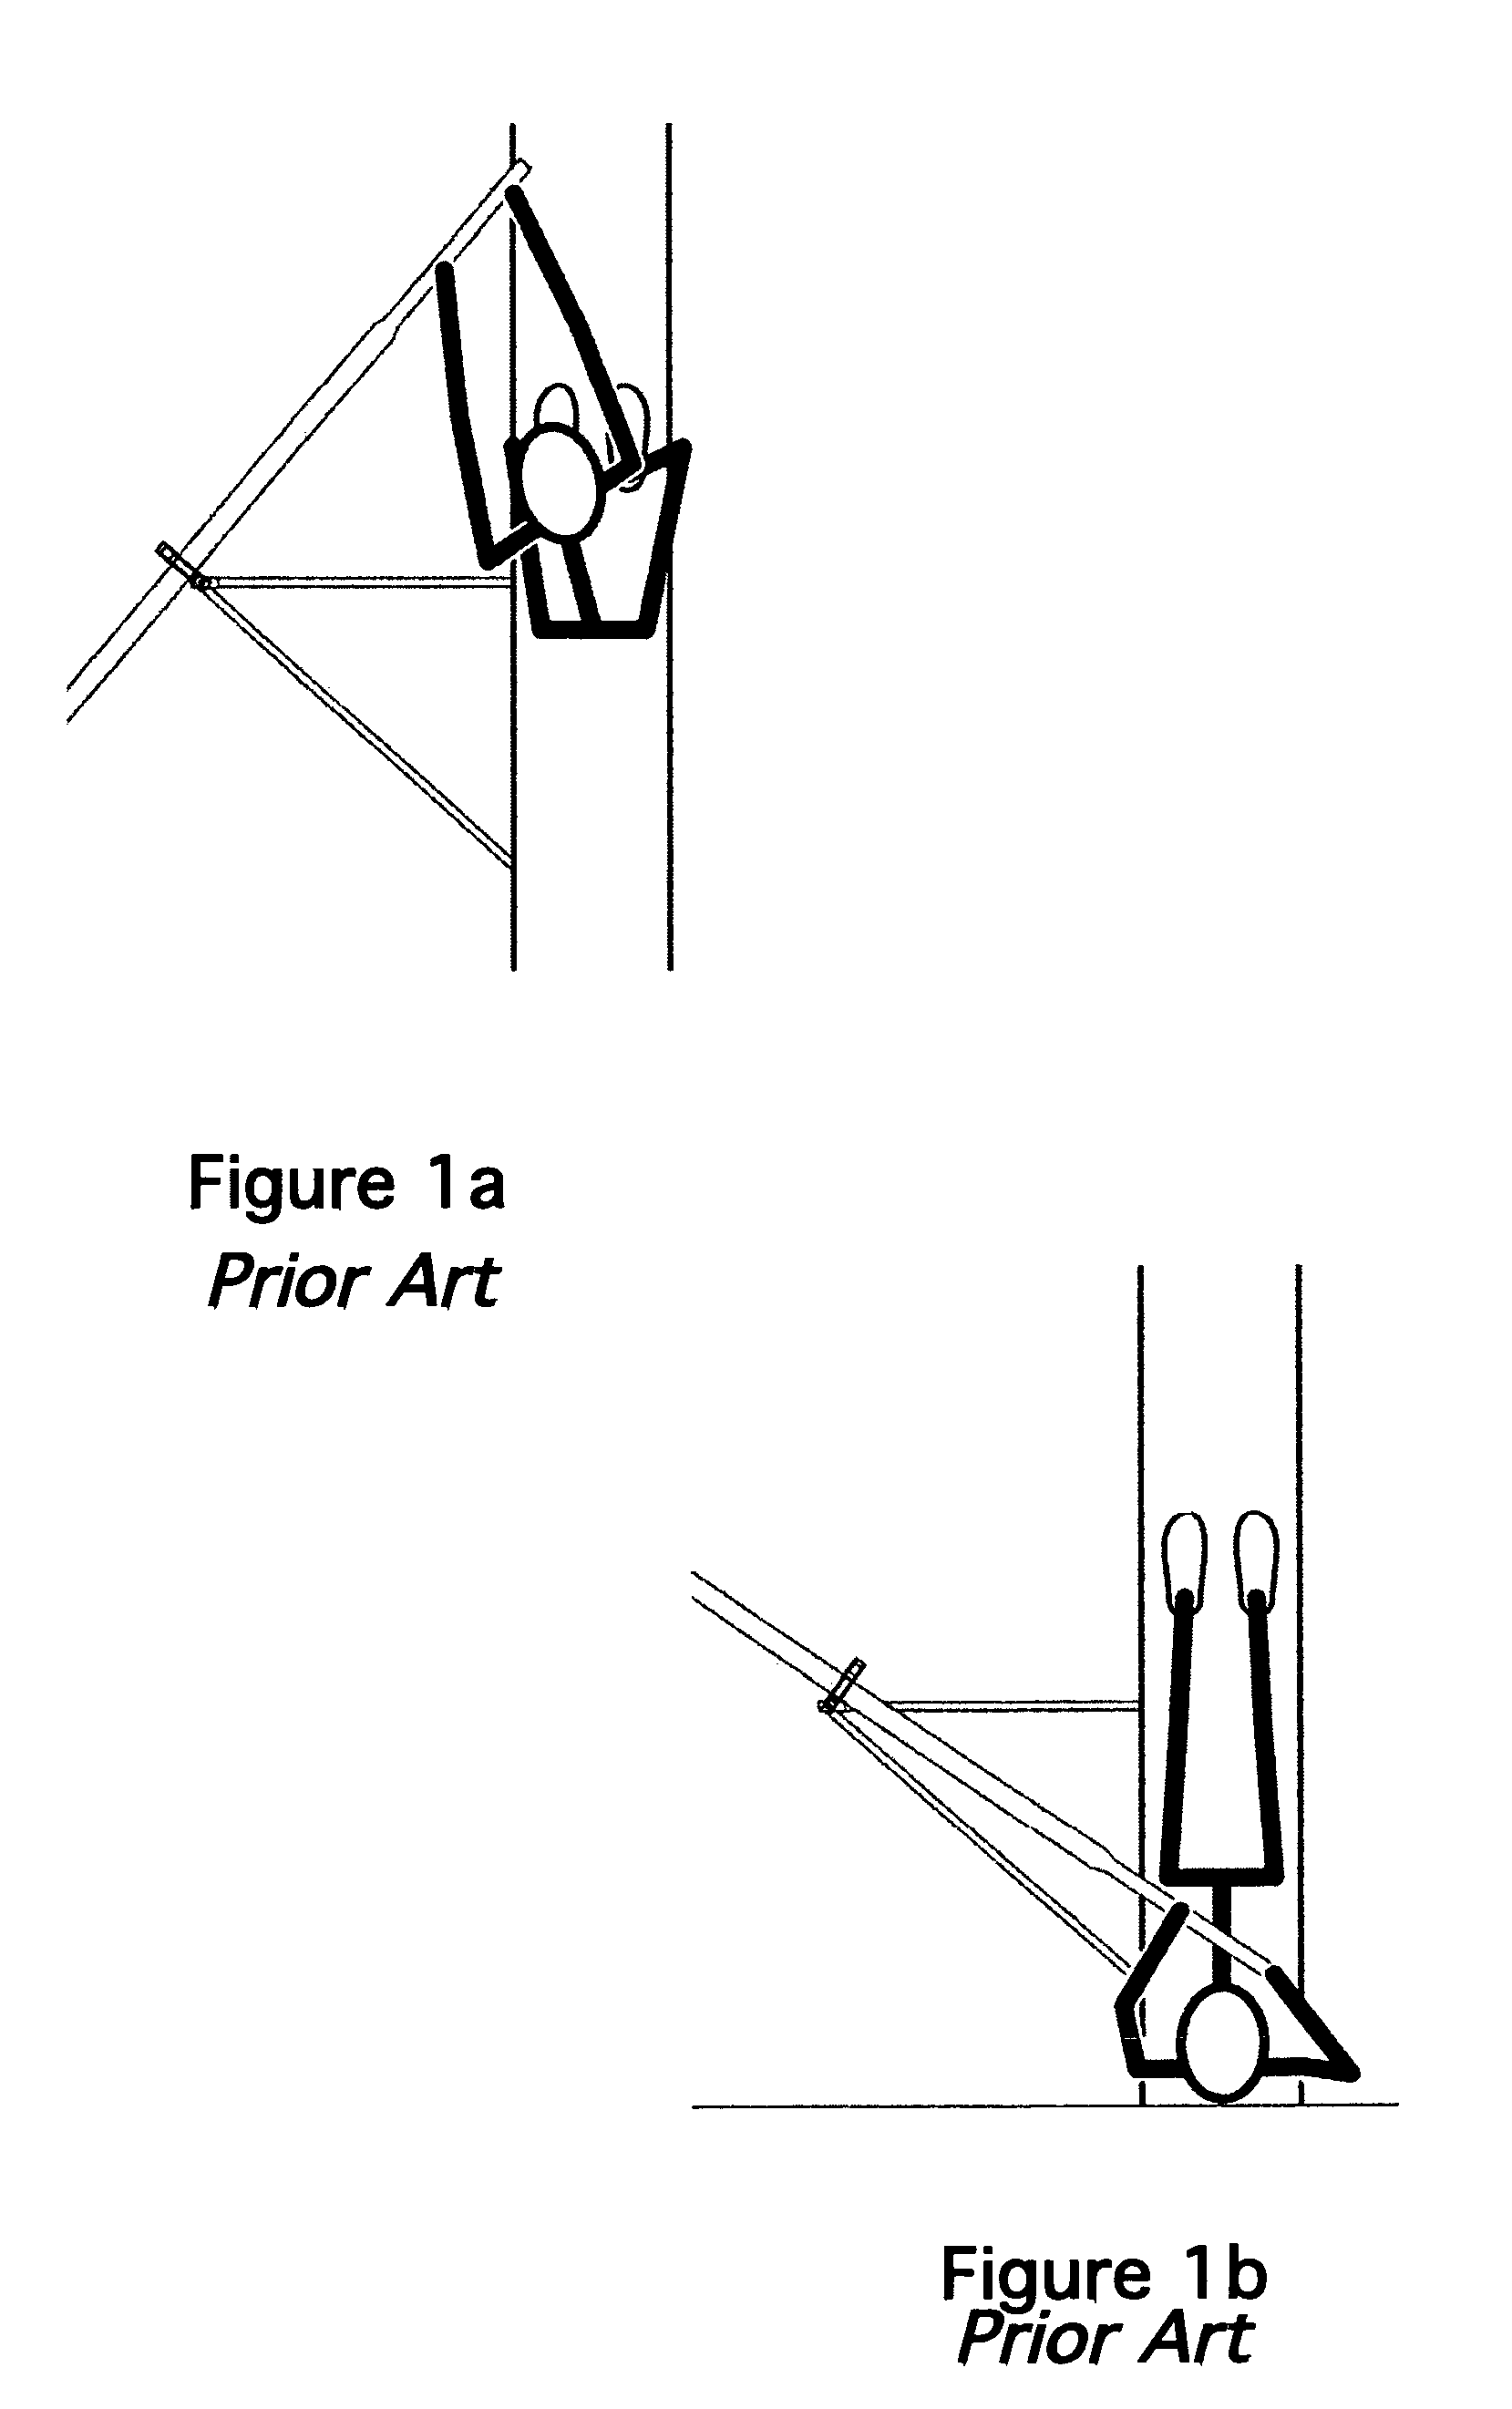 Rowing oar system with articulating handle